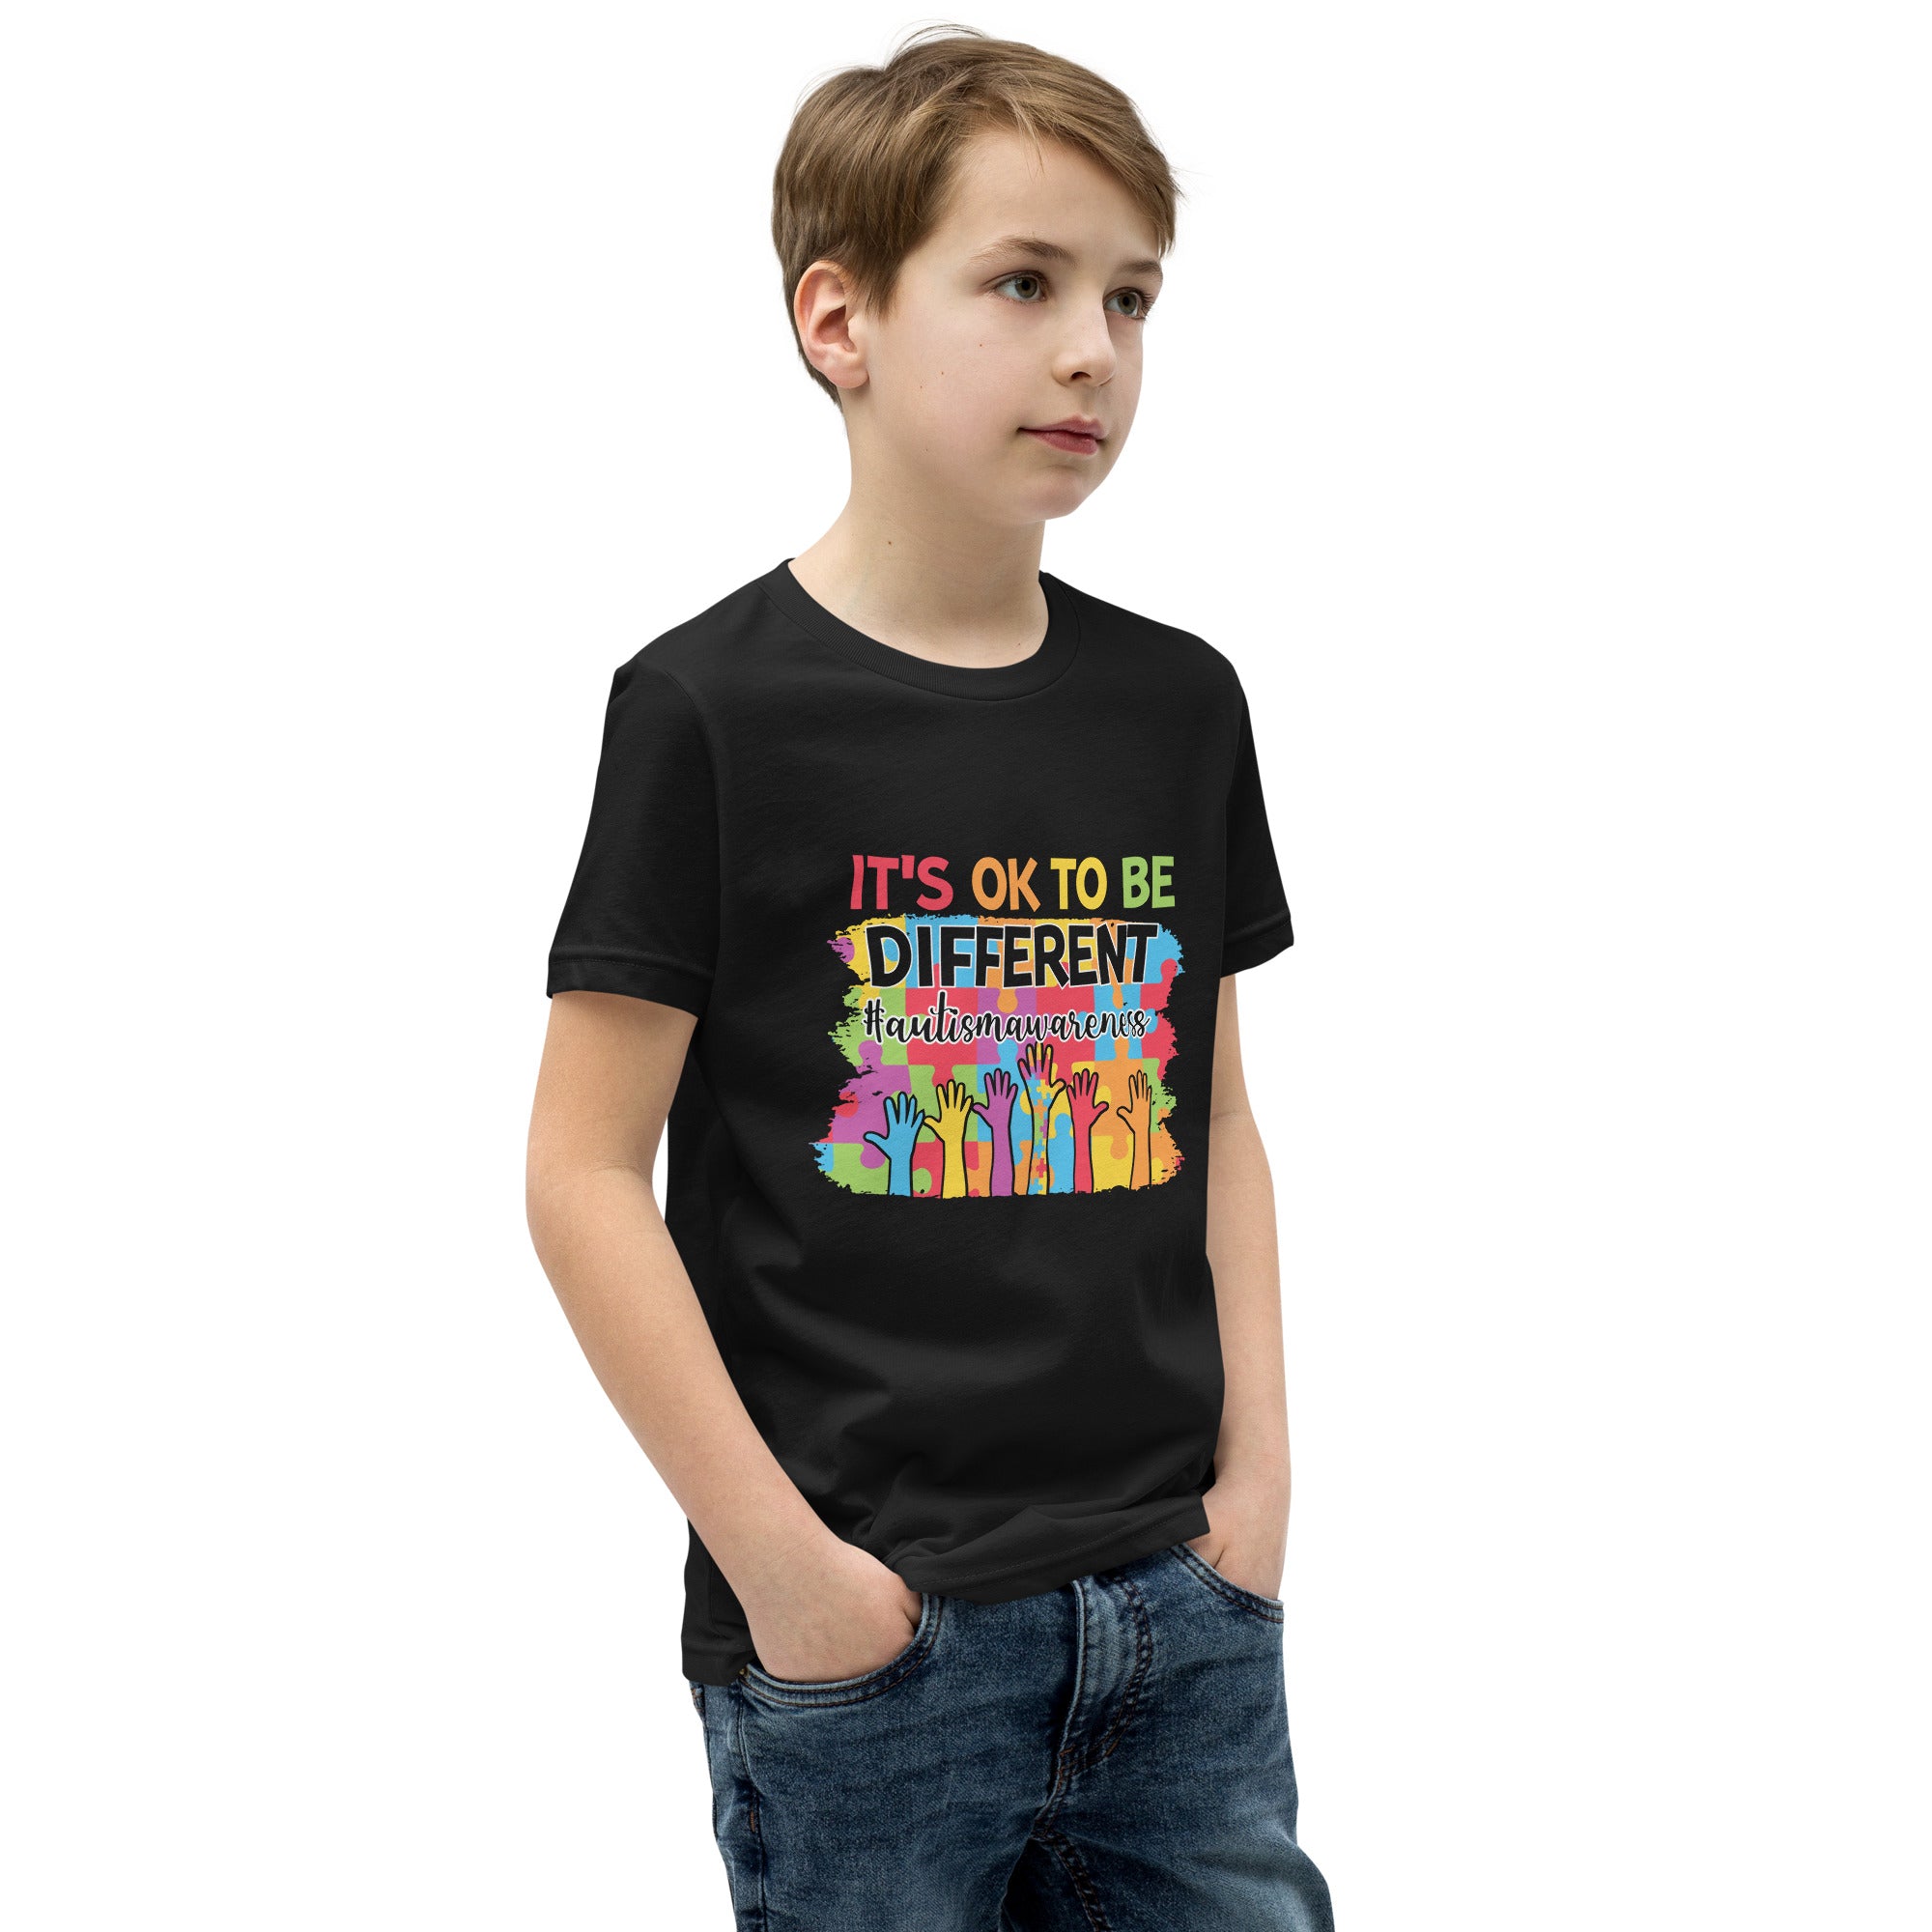 It's ok to be different - Unisex Tee